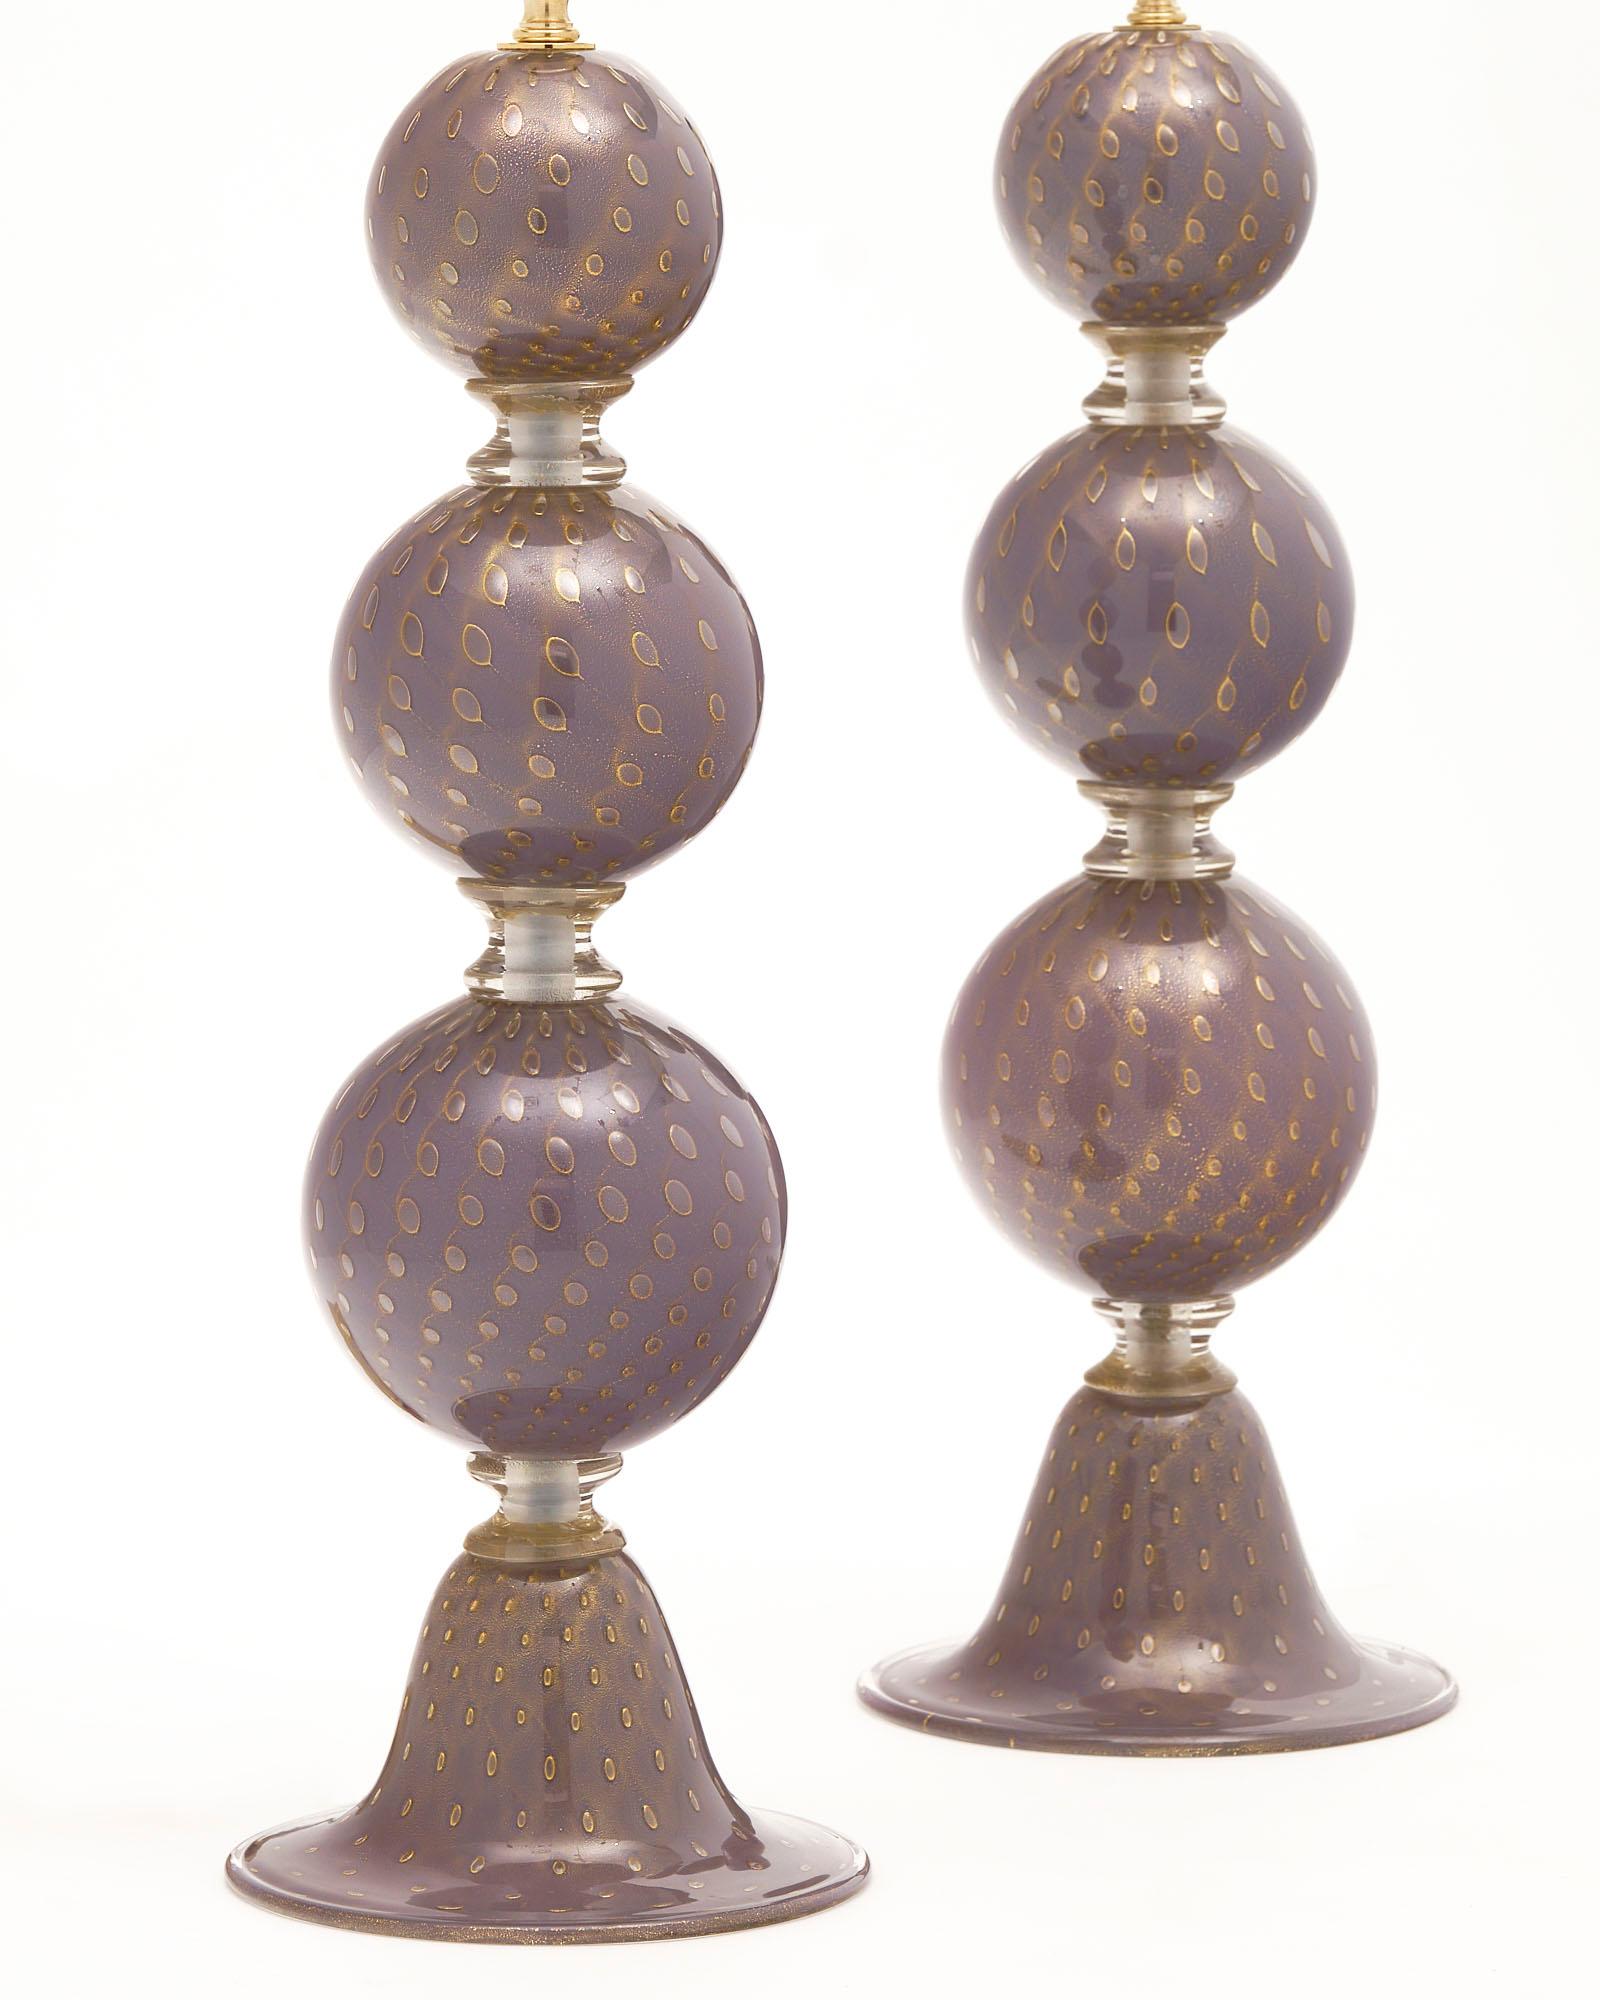 Pair of Italian lamps from the Island of Murano. This pair features purple hand blown glass. The stacked spheres are separated with clear glass rings and stand on a conic base. The glass has been fused with 24 carat gold “bolle” bubbles. They are